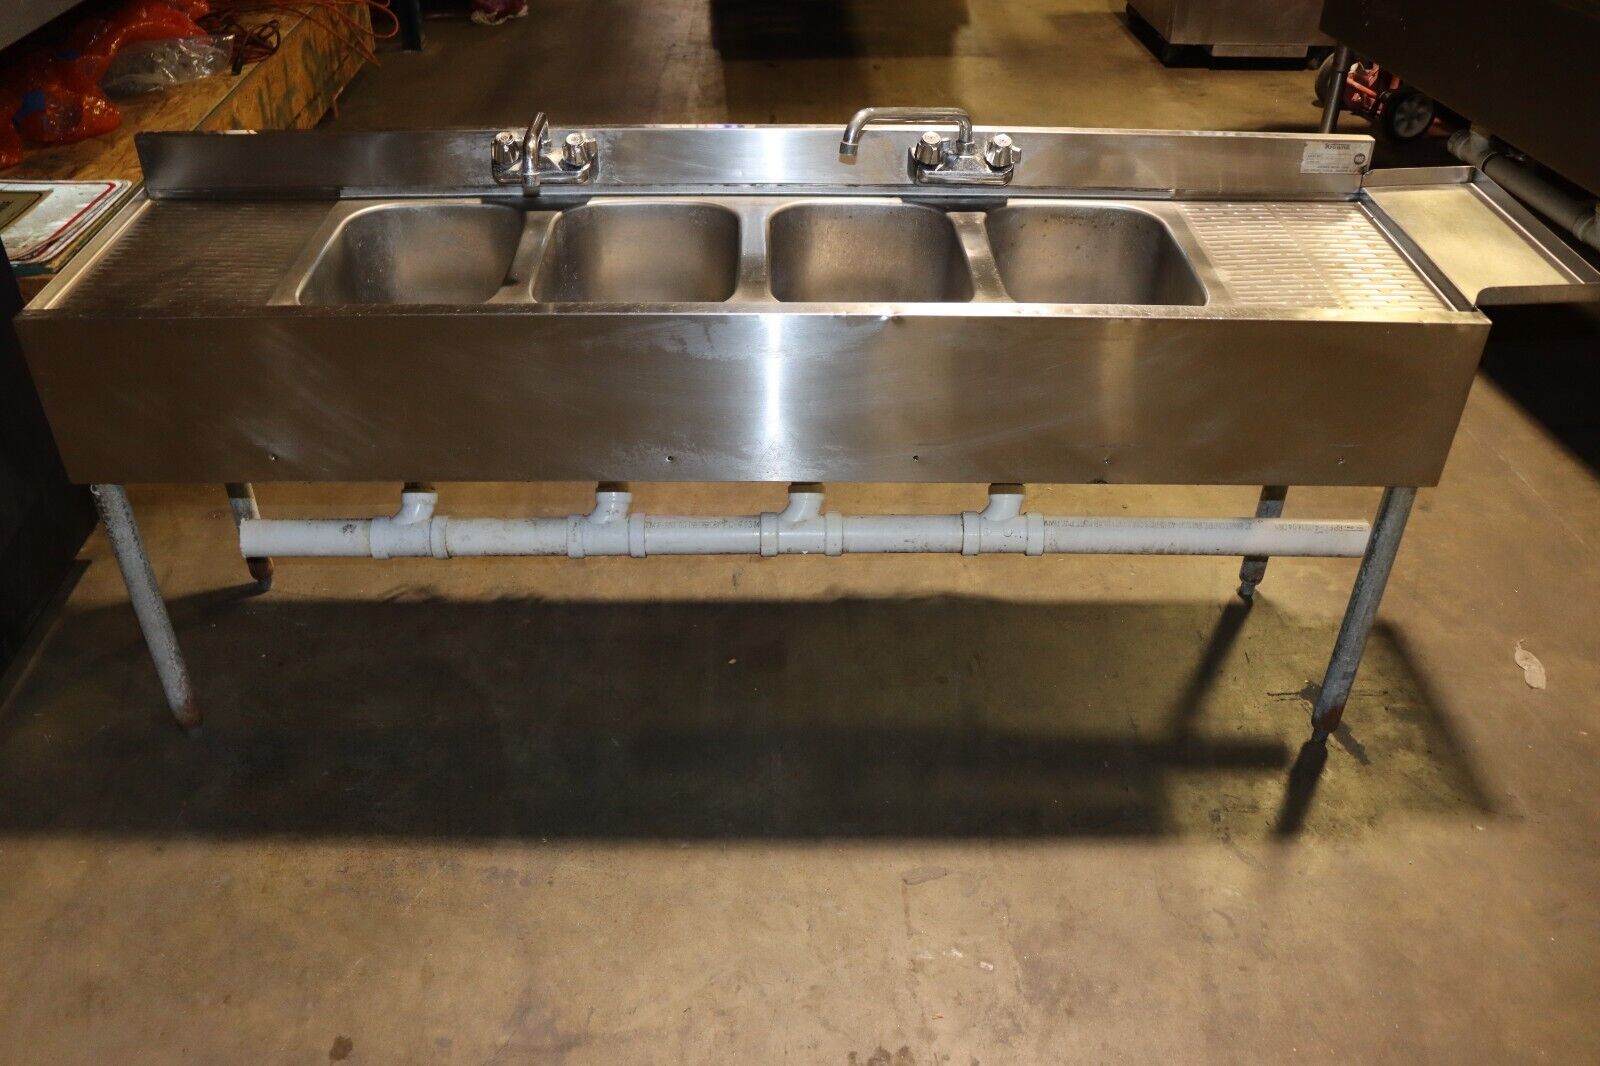 Bar Sink 4 Compartment Stainless Two 12 Inch Drainboards Krowne